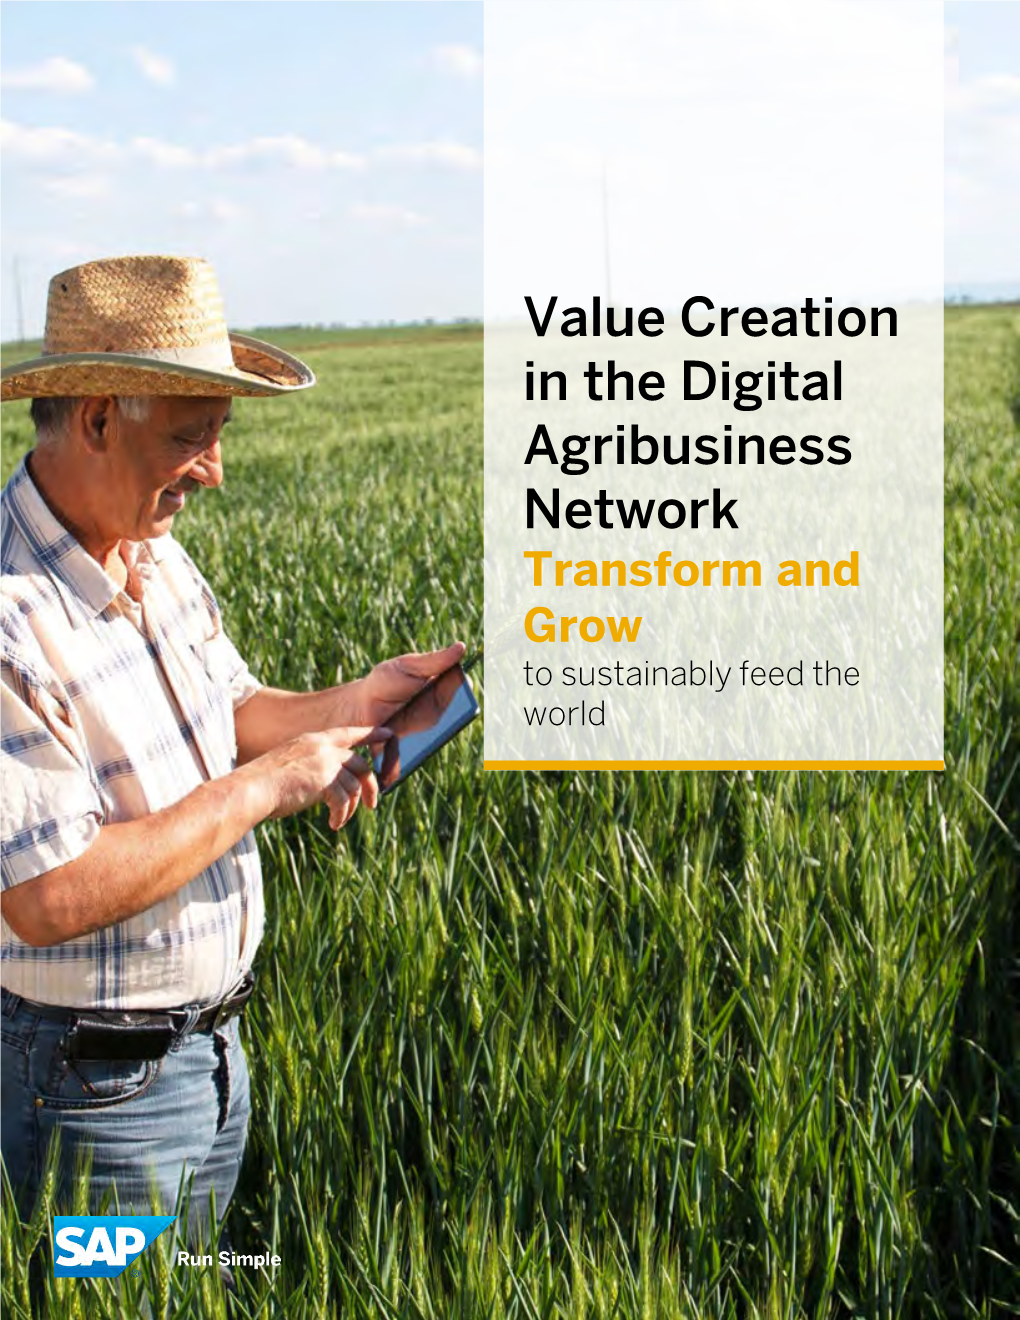 Value Creation in the Digital Agribusiness Network Transform and Grow to Sustainably Feed the World